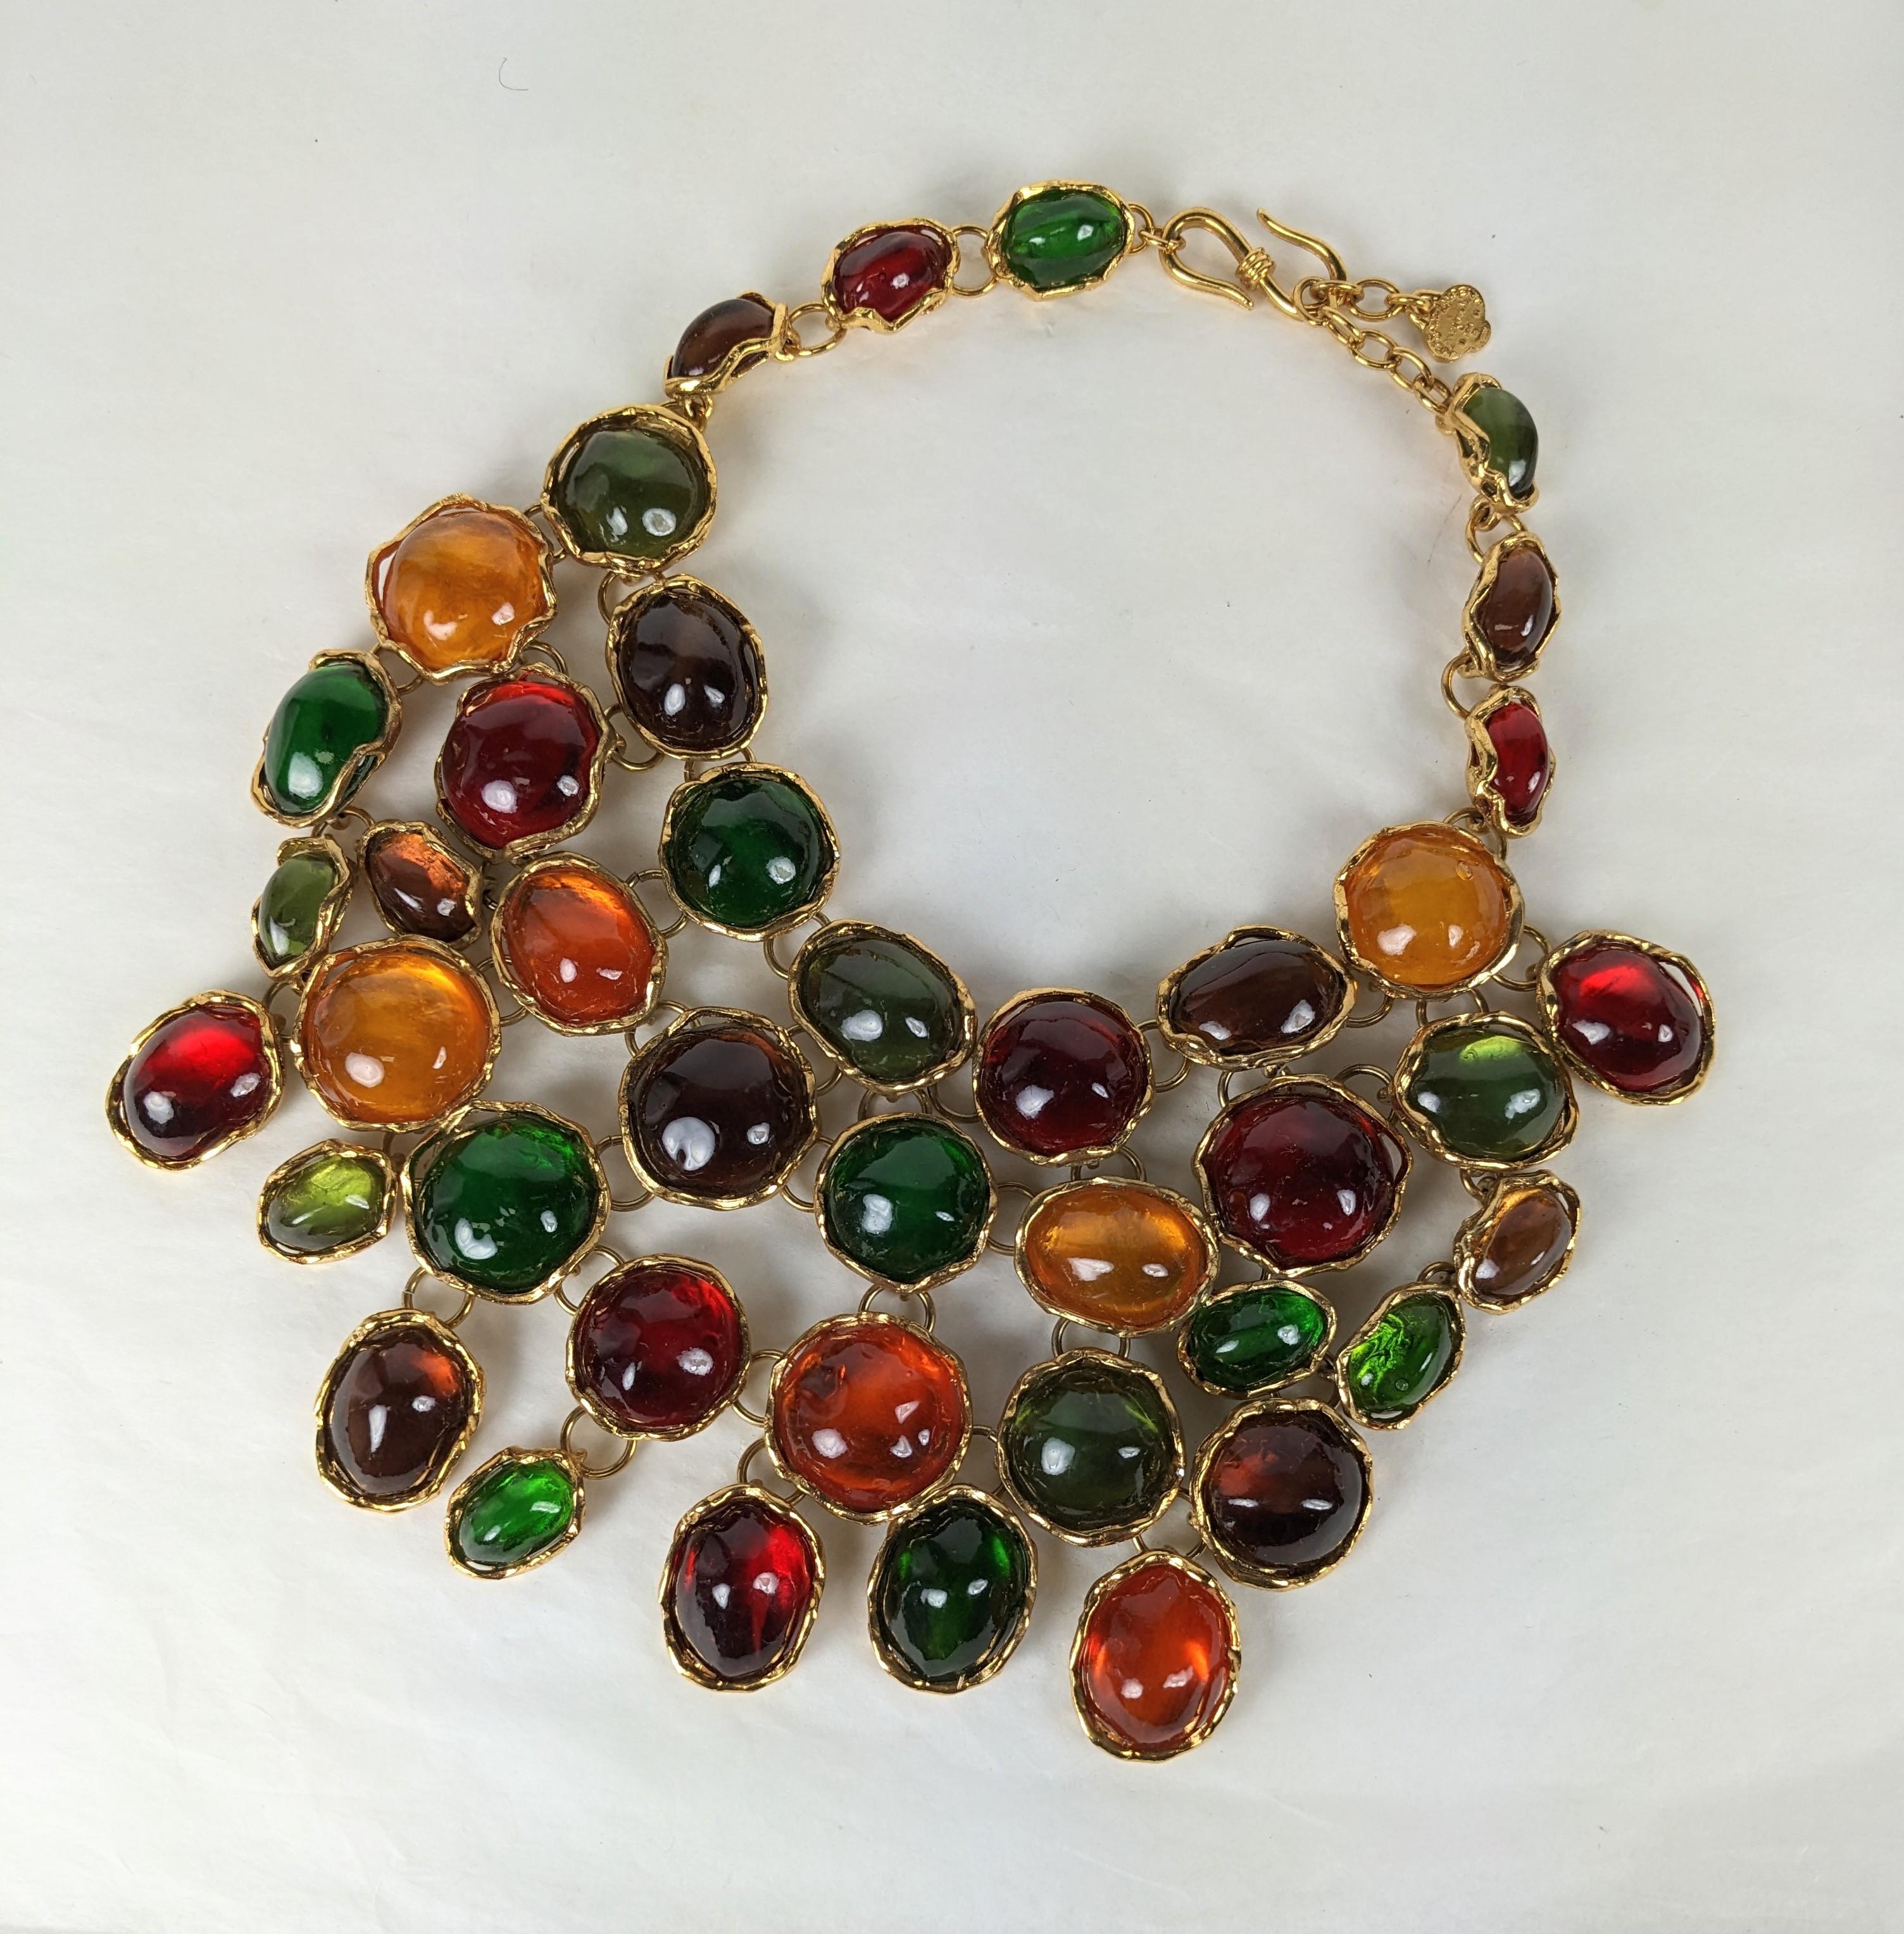 Iconic Yves Saint Laurent Gem Set Bib by LouLou de la Falaise and Maison Goossens for YSL dating to 1989.  Dramatic, oversized poured glass style bib necklace with huge resin gems in gilt bronze articulated settings. Adjustable hook closure. Adjusts